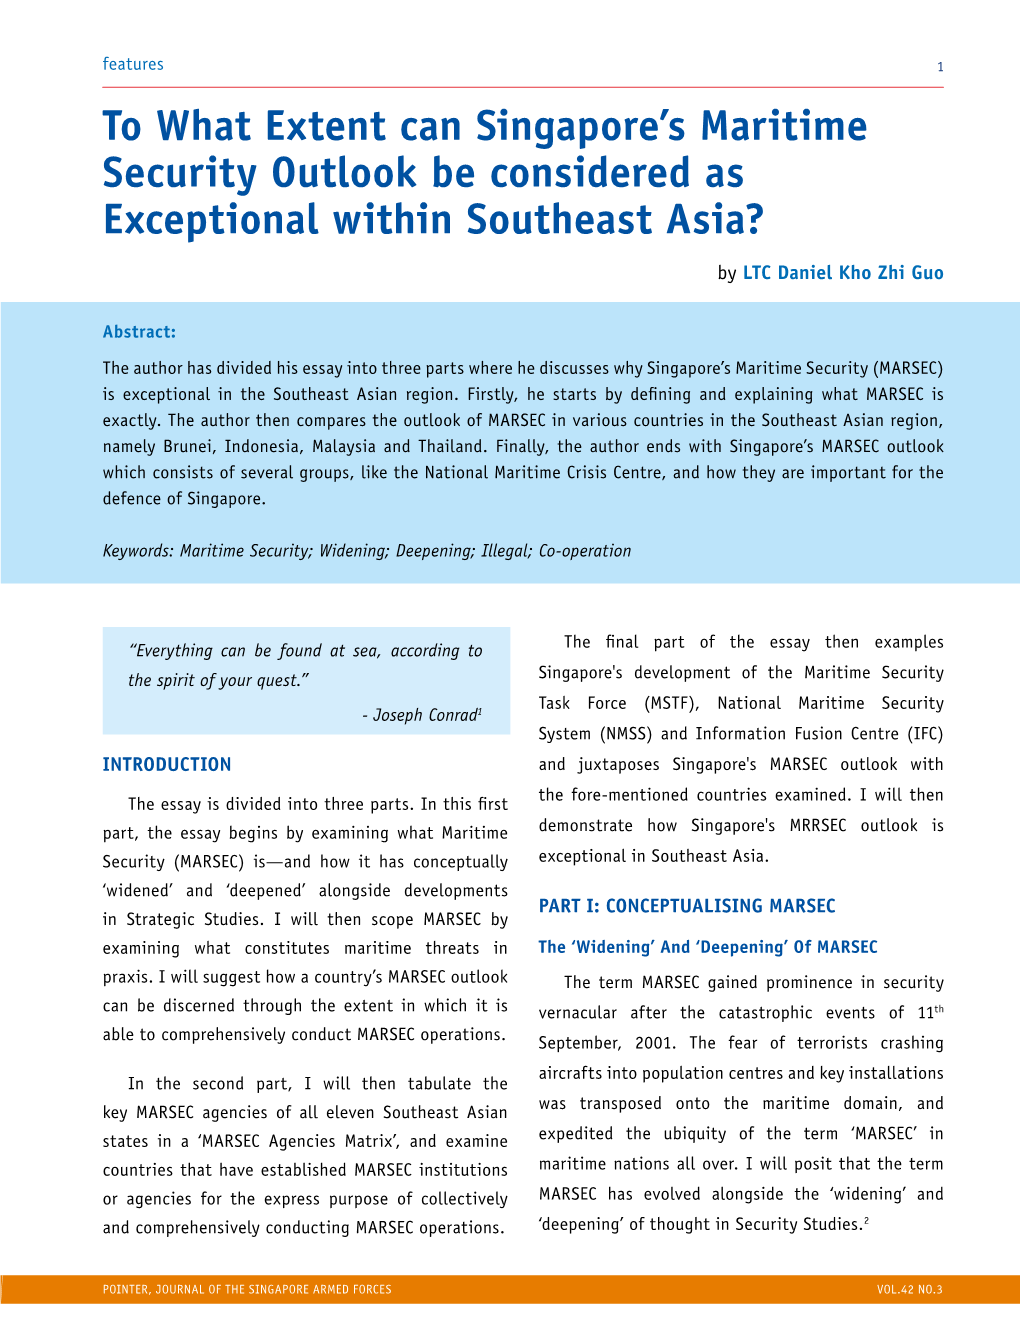 To What Extent Can Singapore's Maritime Security Outlook Be Considered As Exceptional Within Southeast Asia?